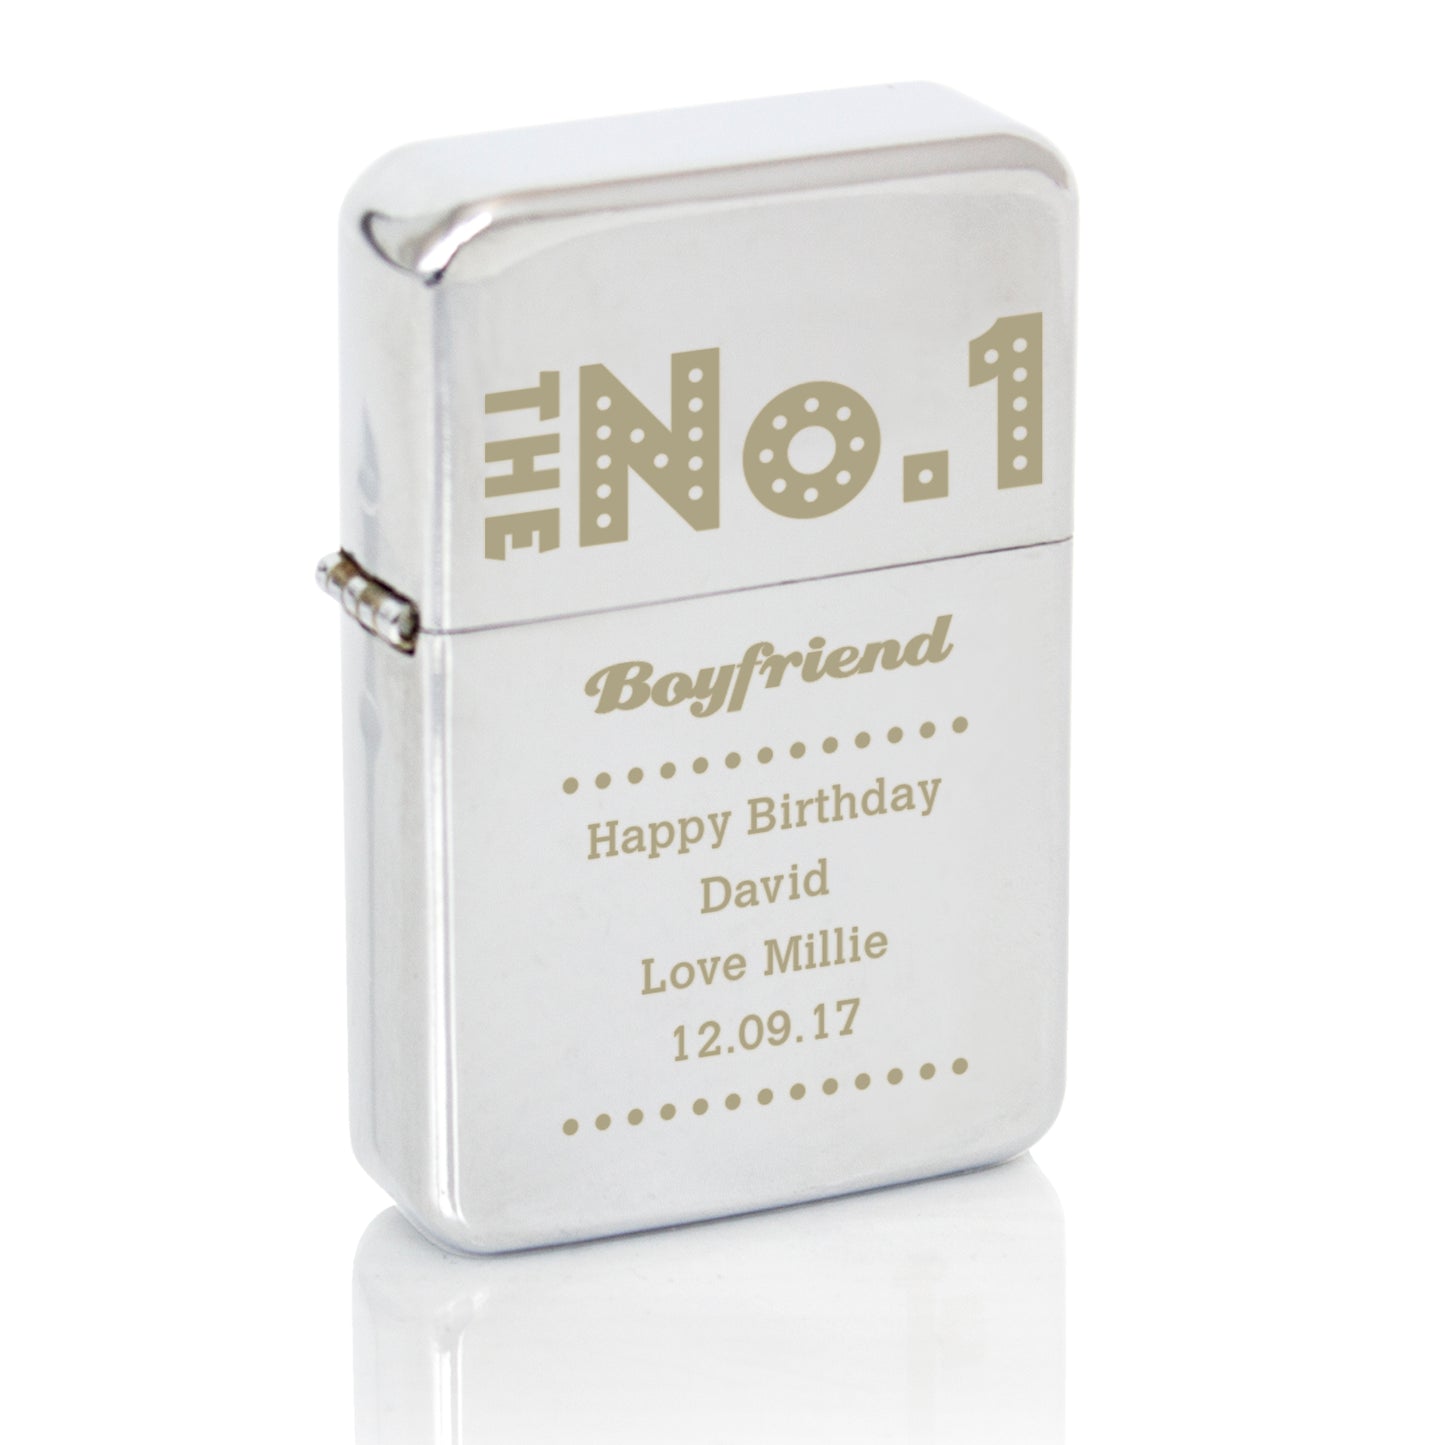 Personalised The No.1 Silver Lighter - Personalise It!